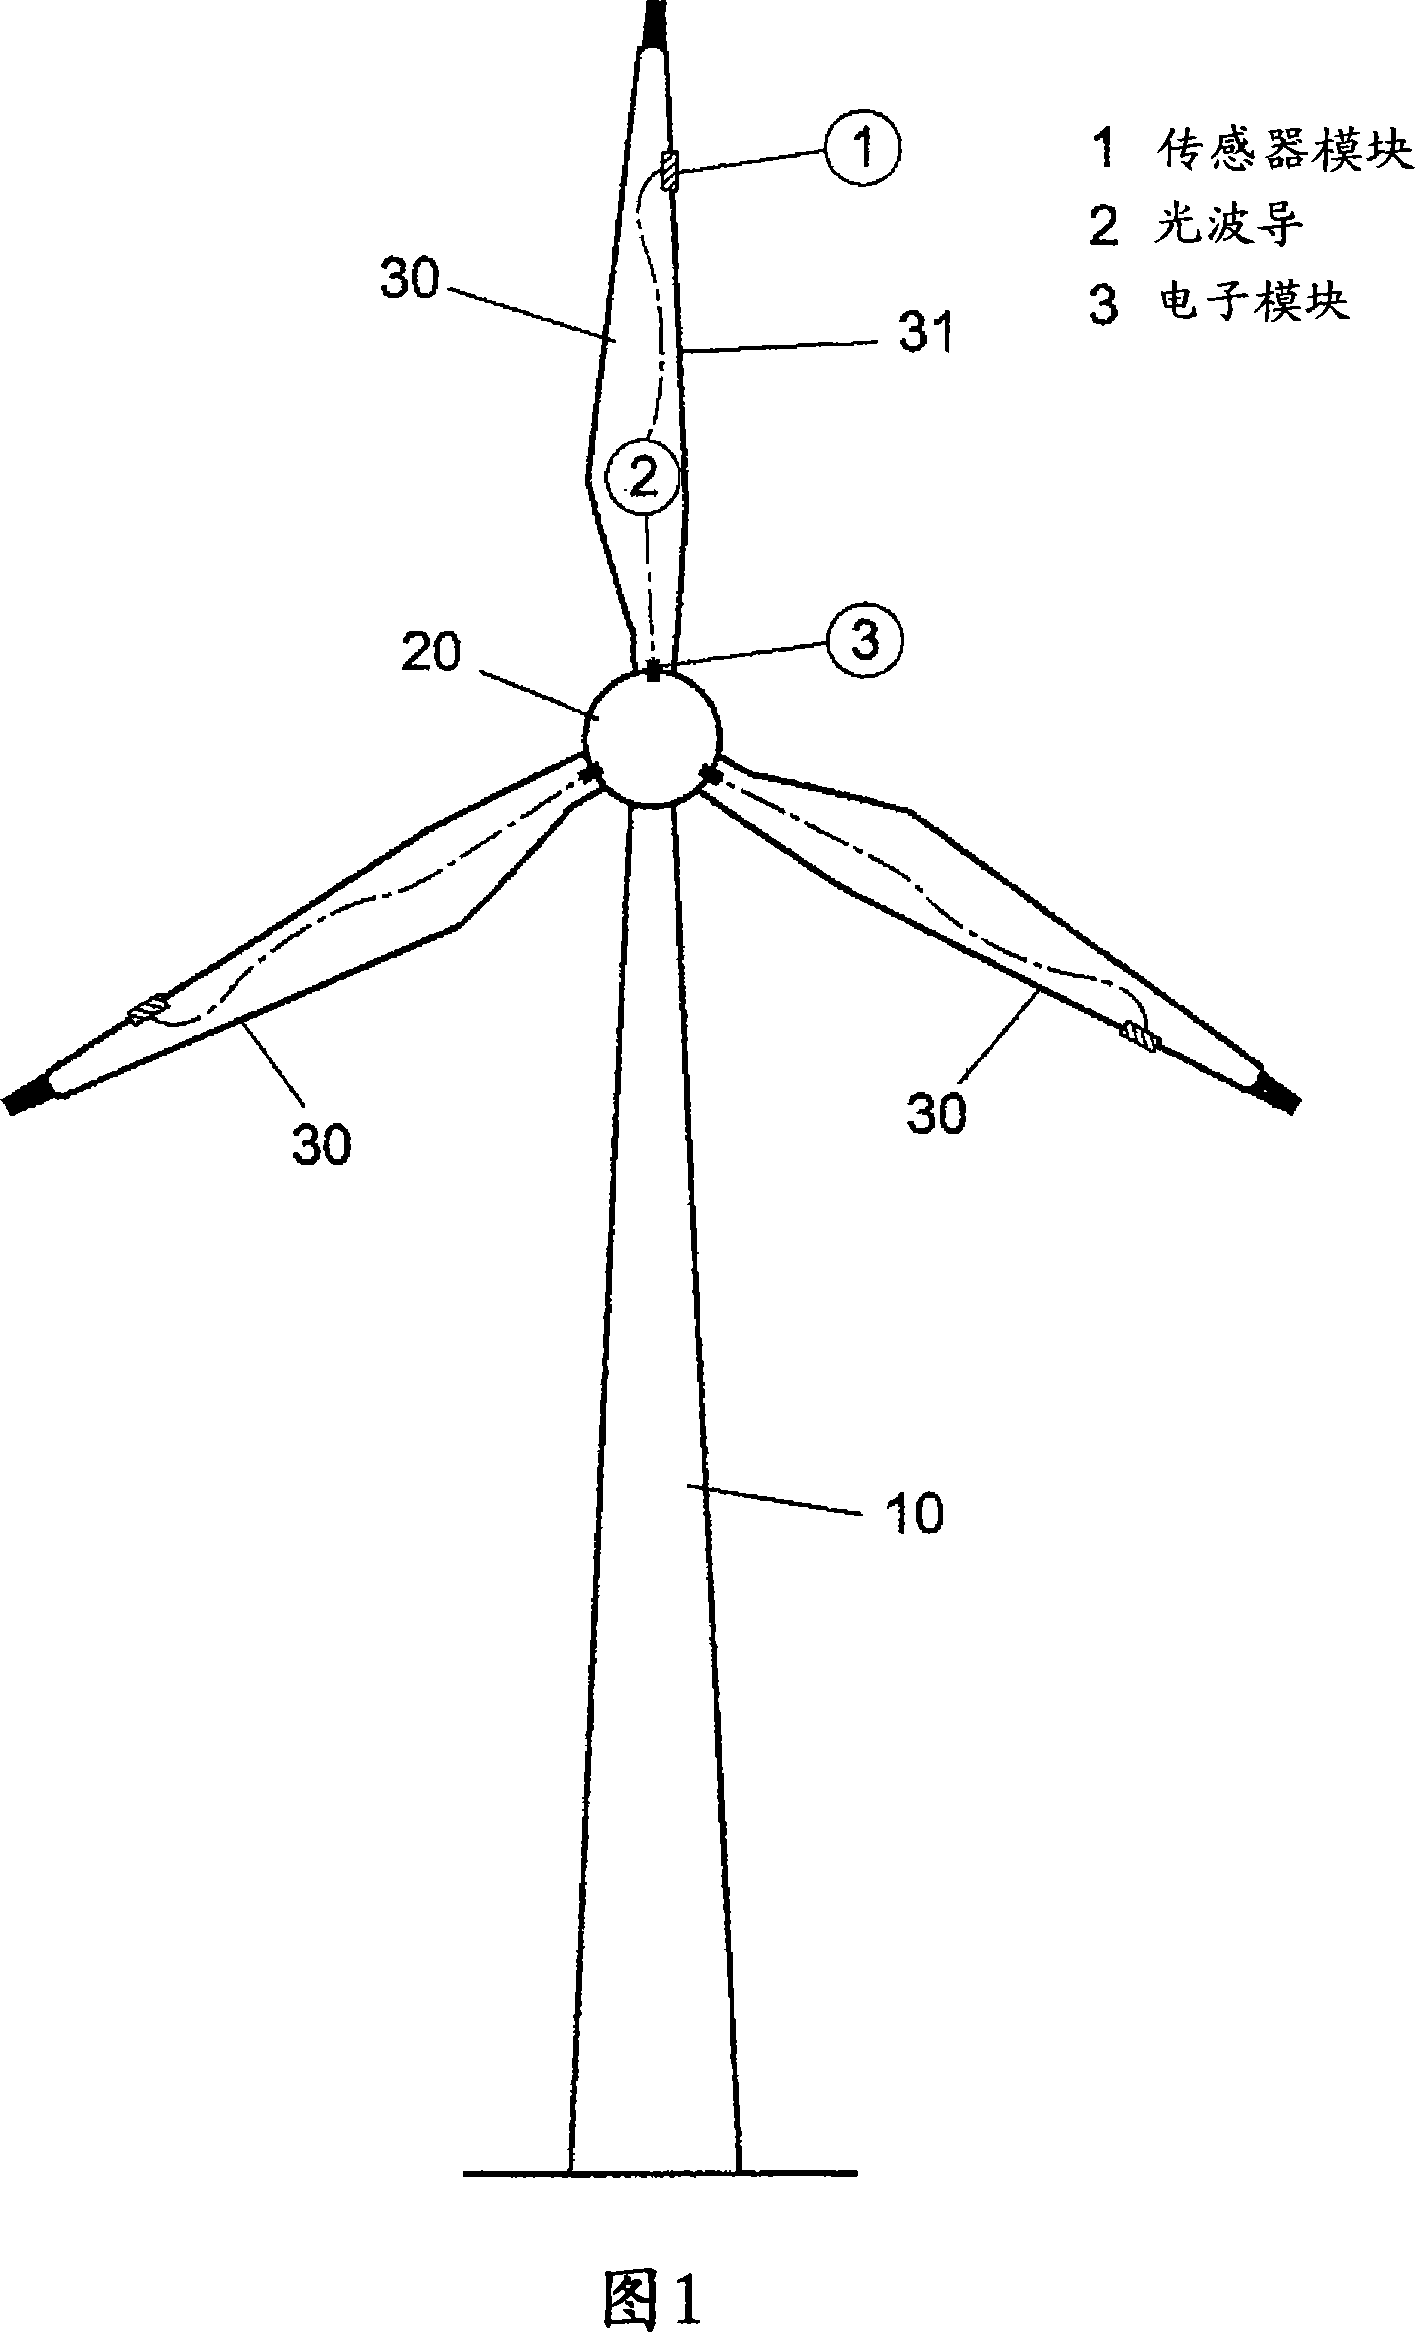 Rotor blade for wind power equipment